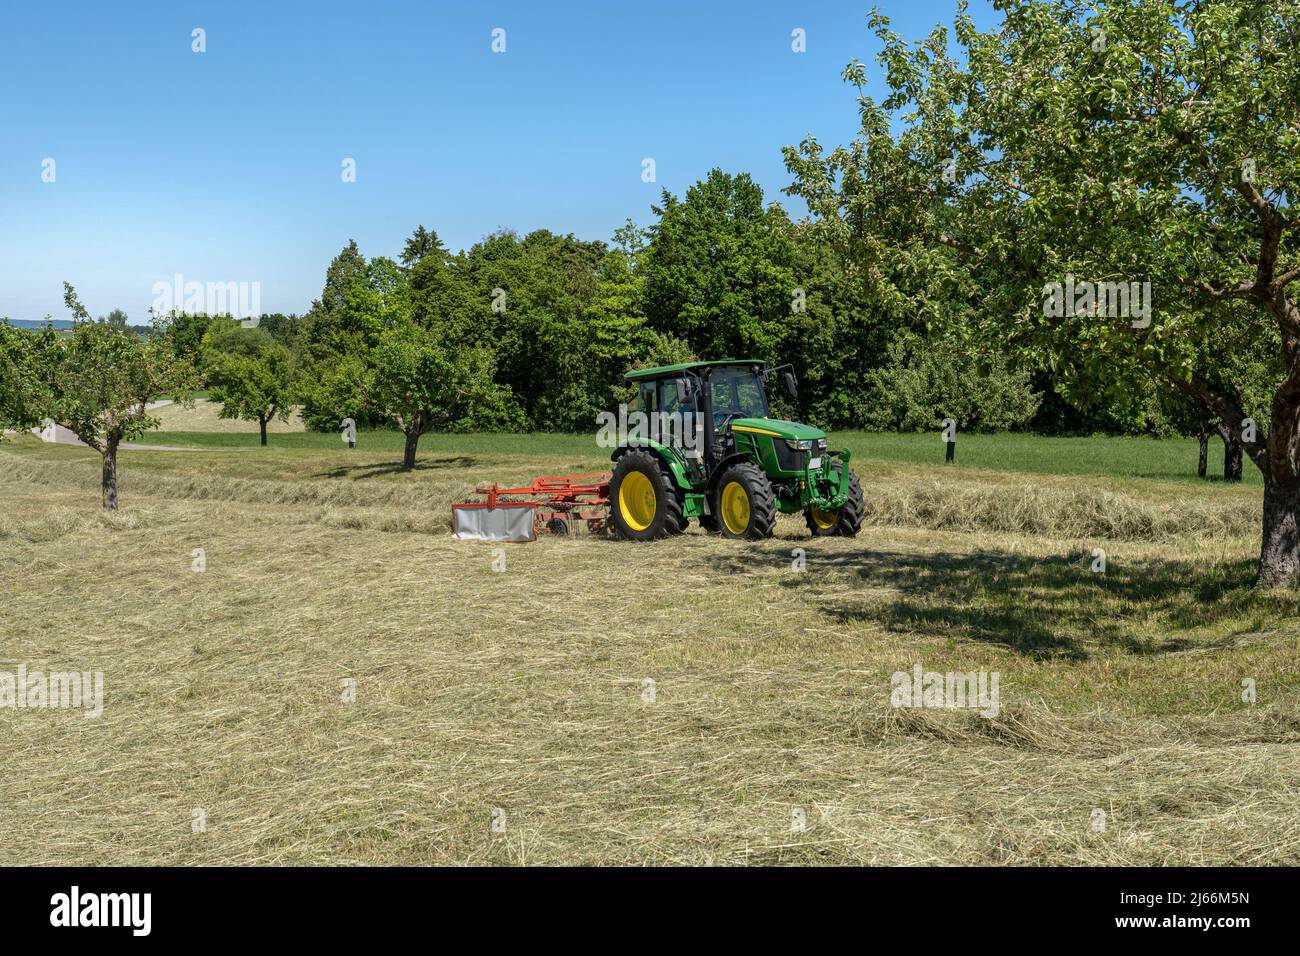 Tractor making hay in a meadow orchard Stock Photo